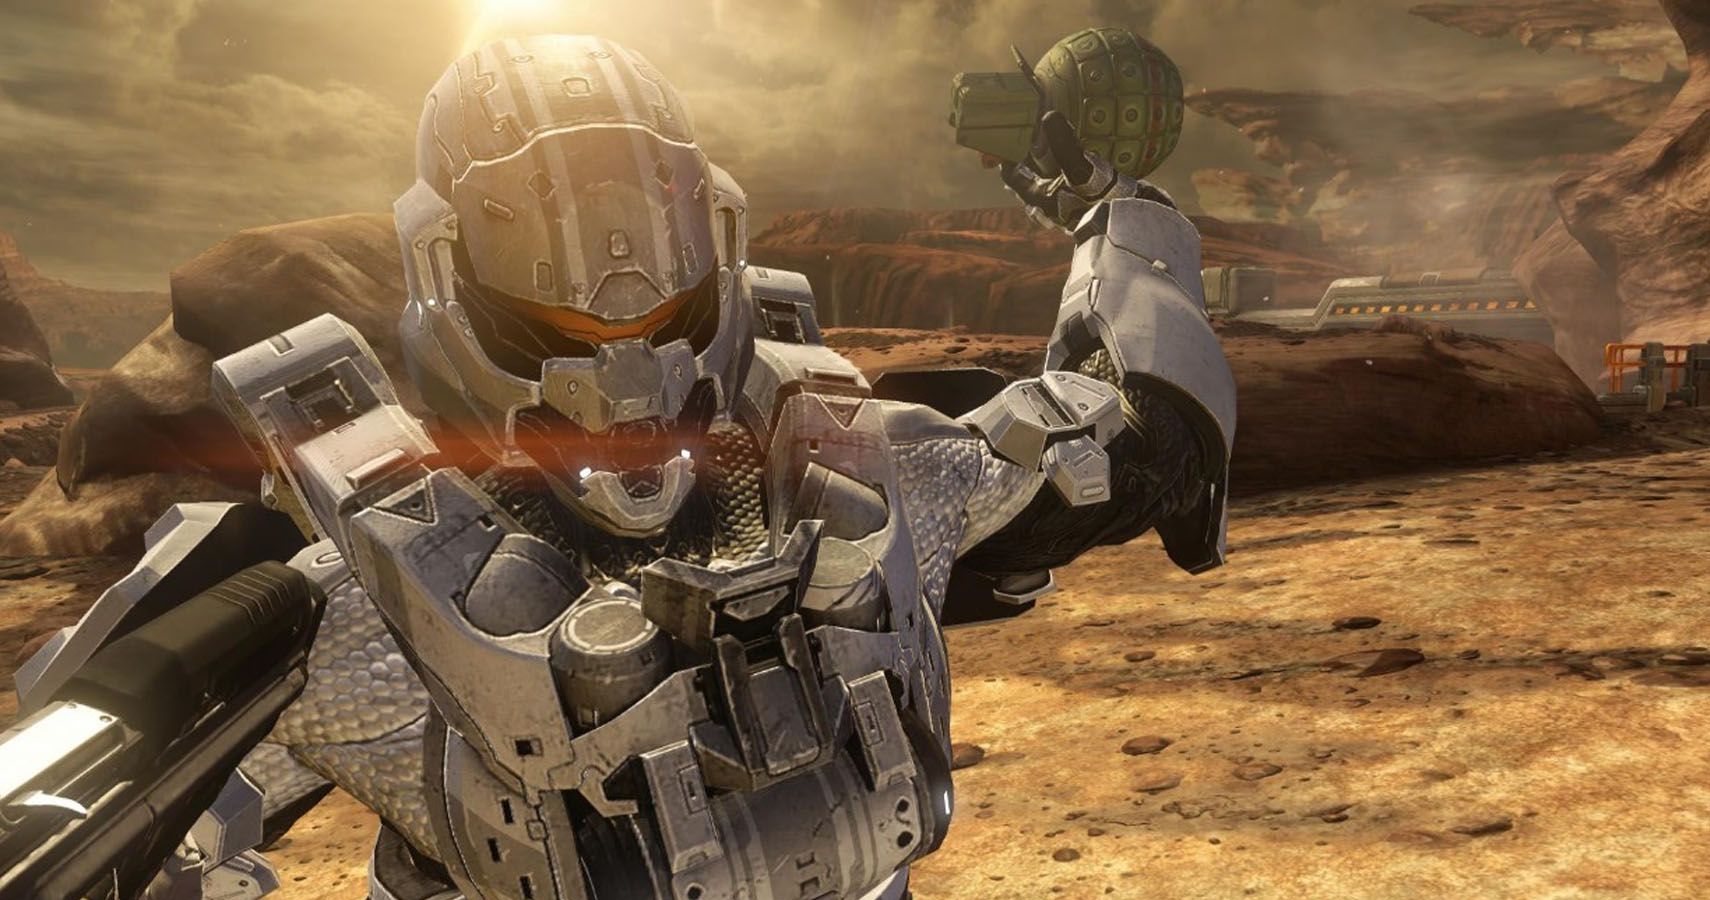 Halo TV Show: 10 Key Things Missing From The Show